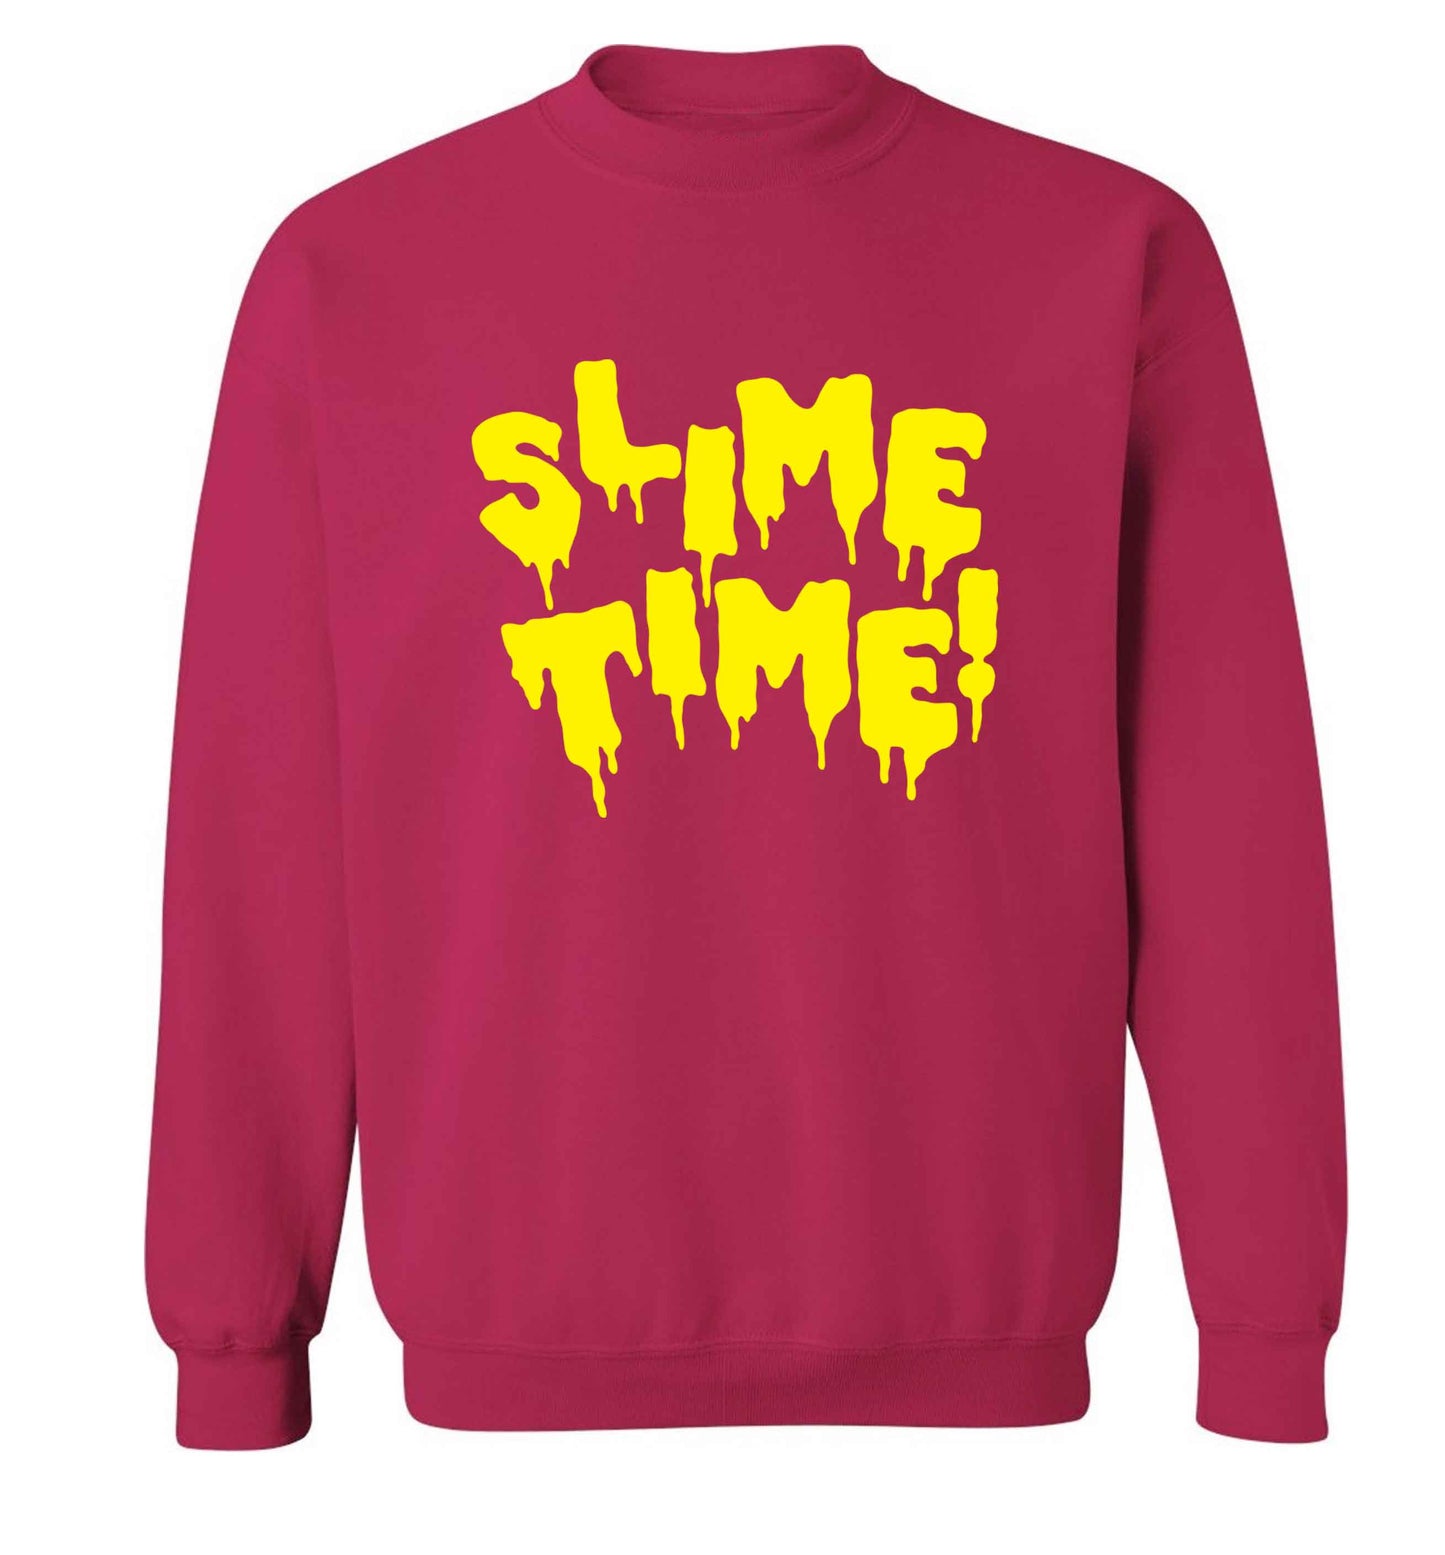 Neon yellow slime time adult's unisex pink sweater 2XL